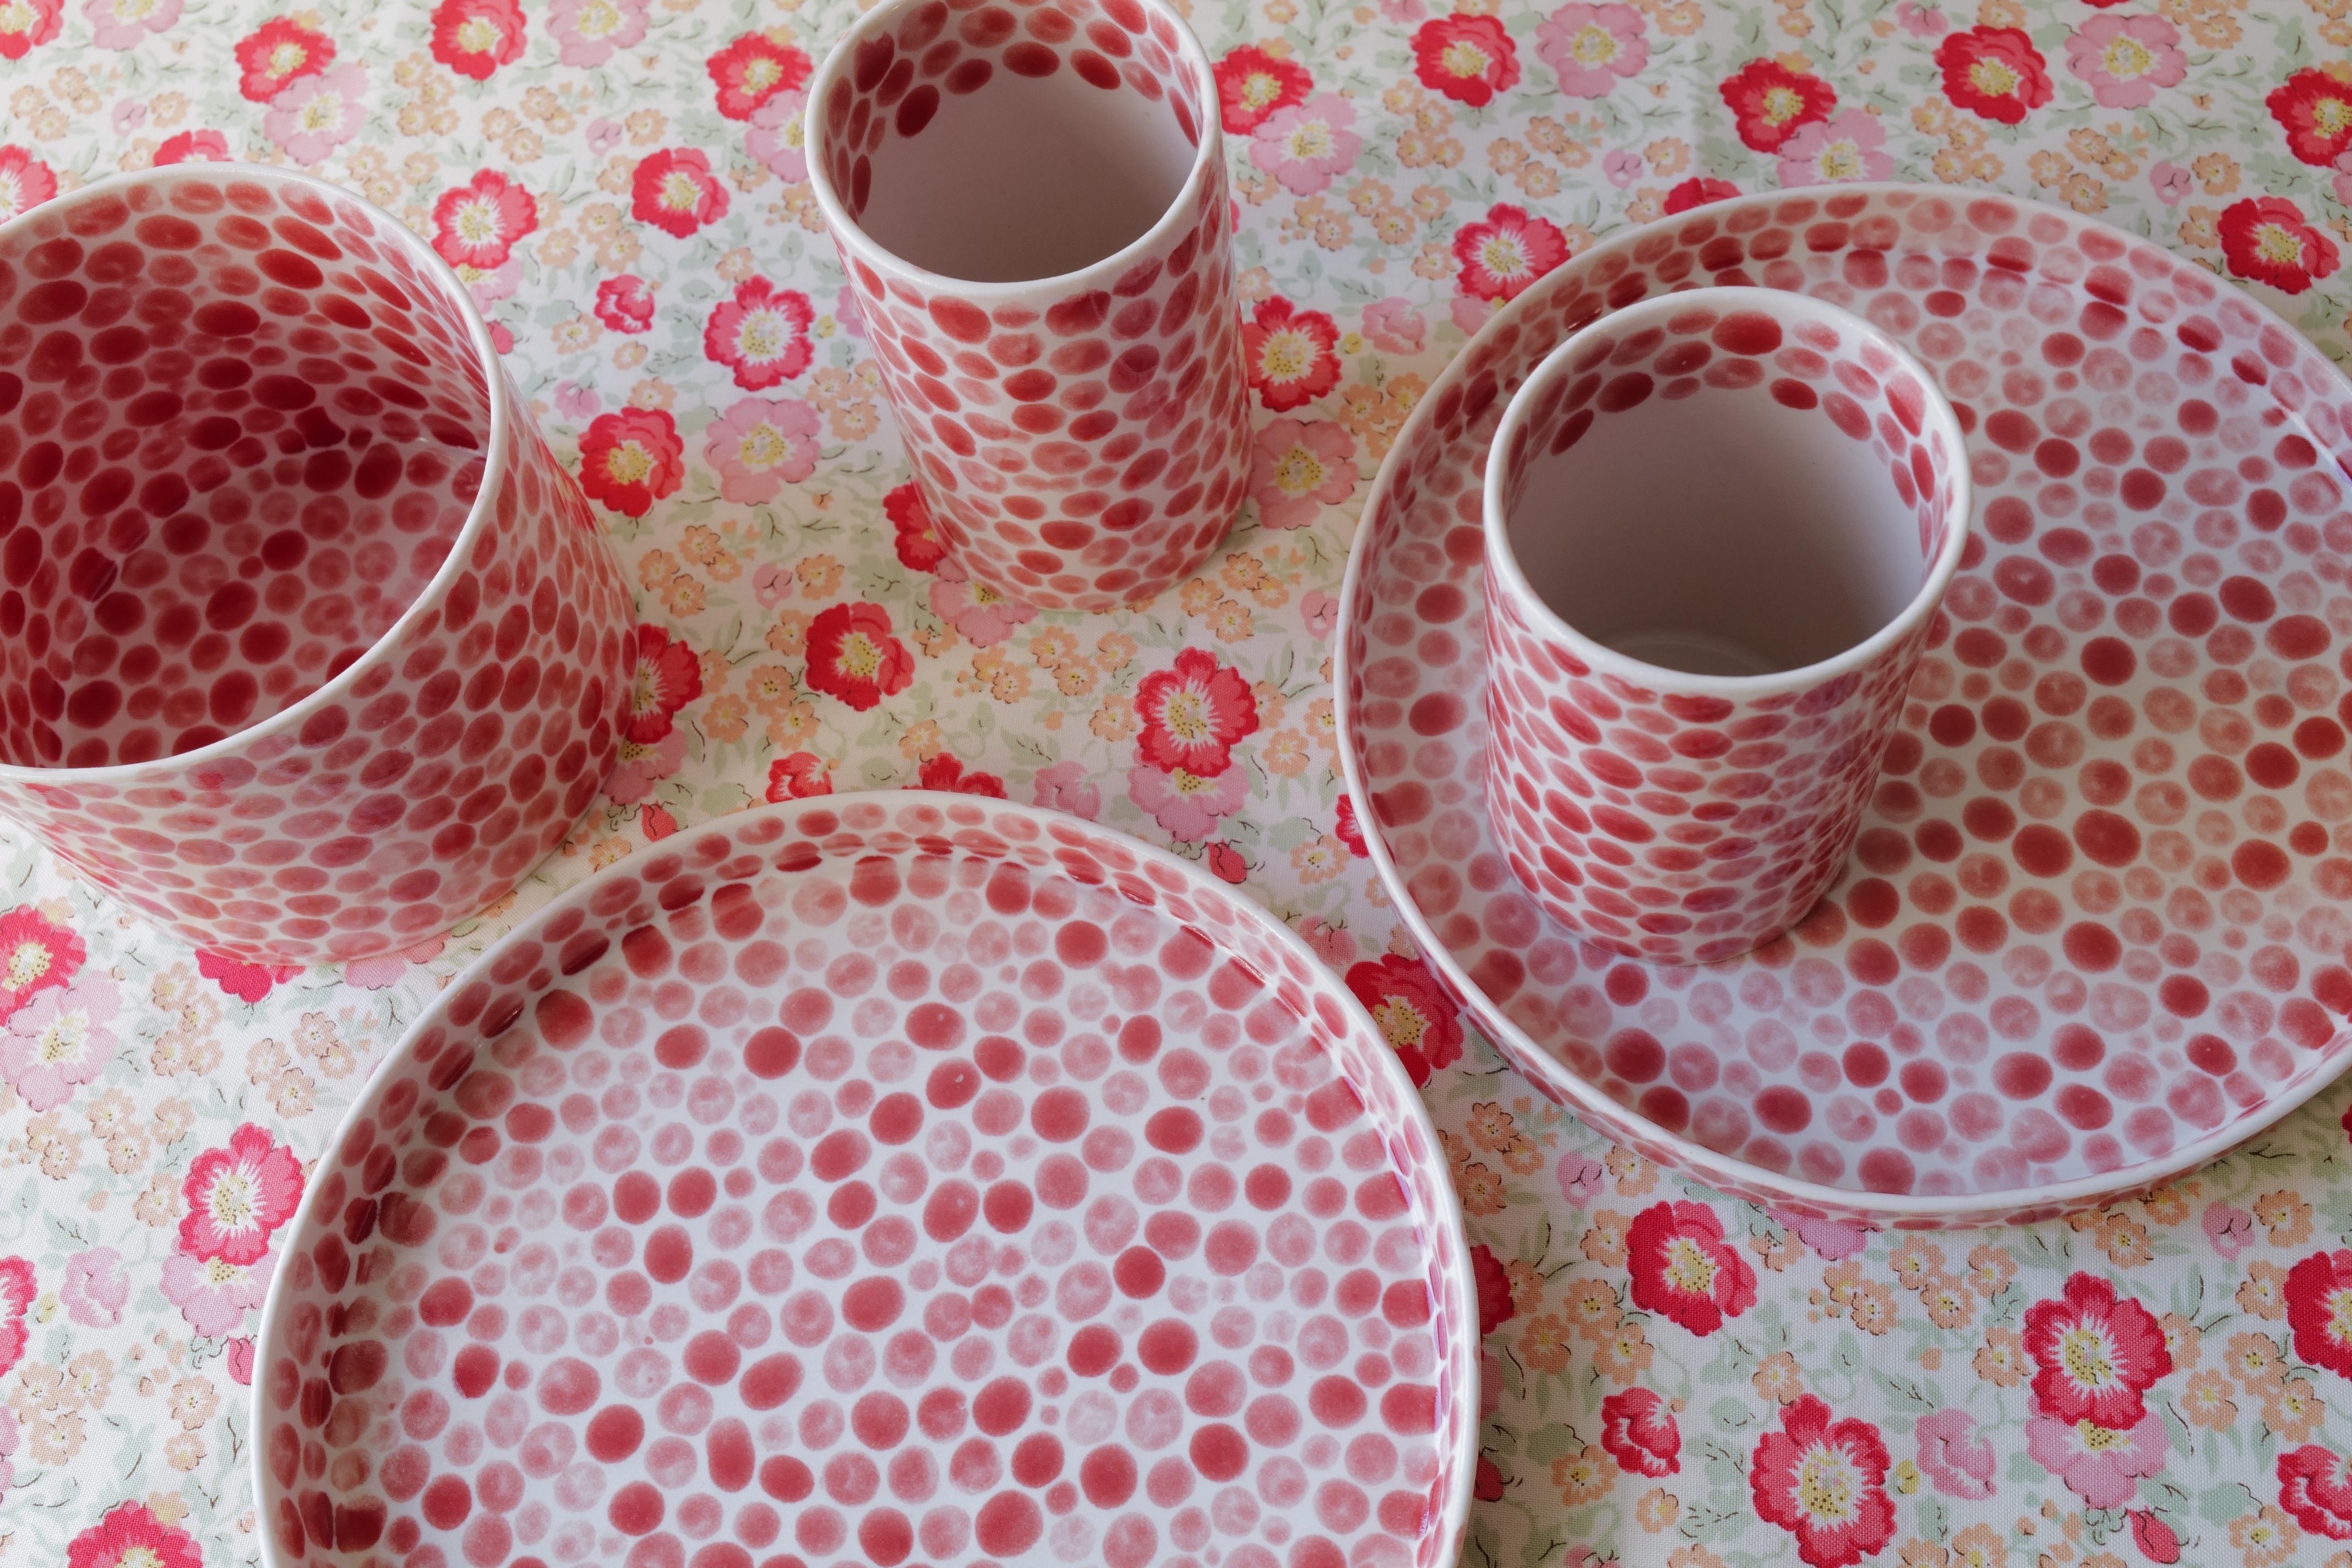 Red Dots Porcelain Tall Cup by Lana Kova 2